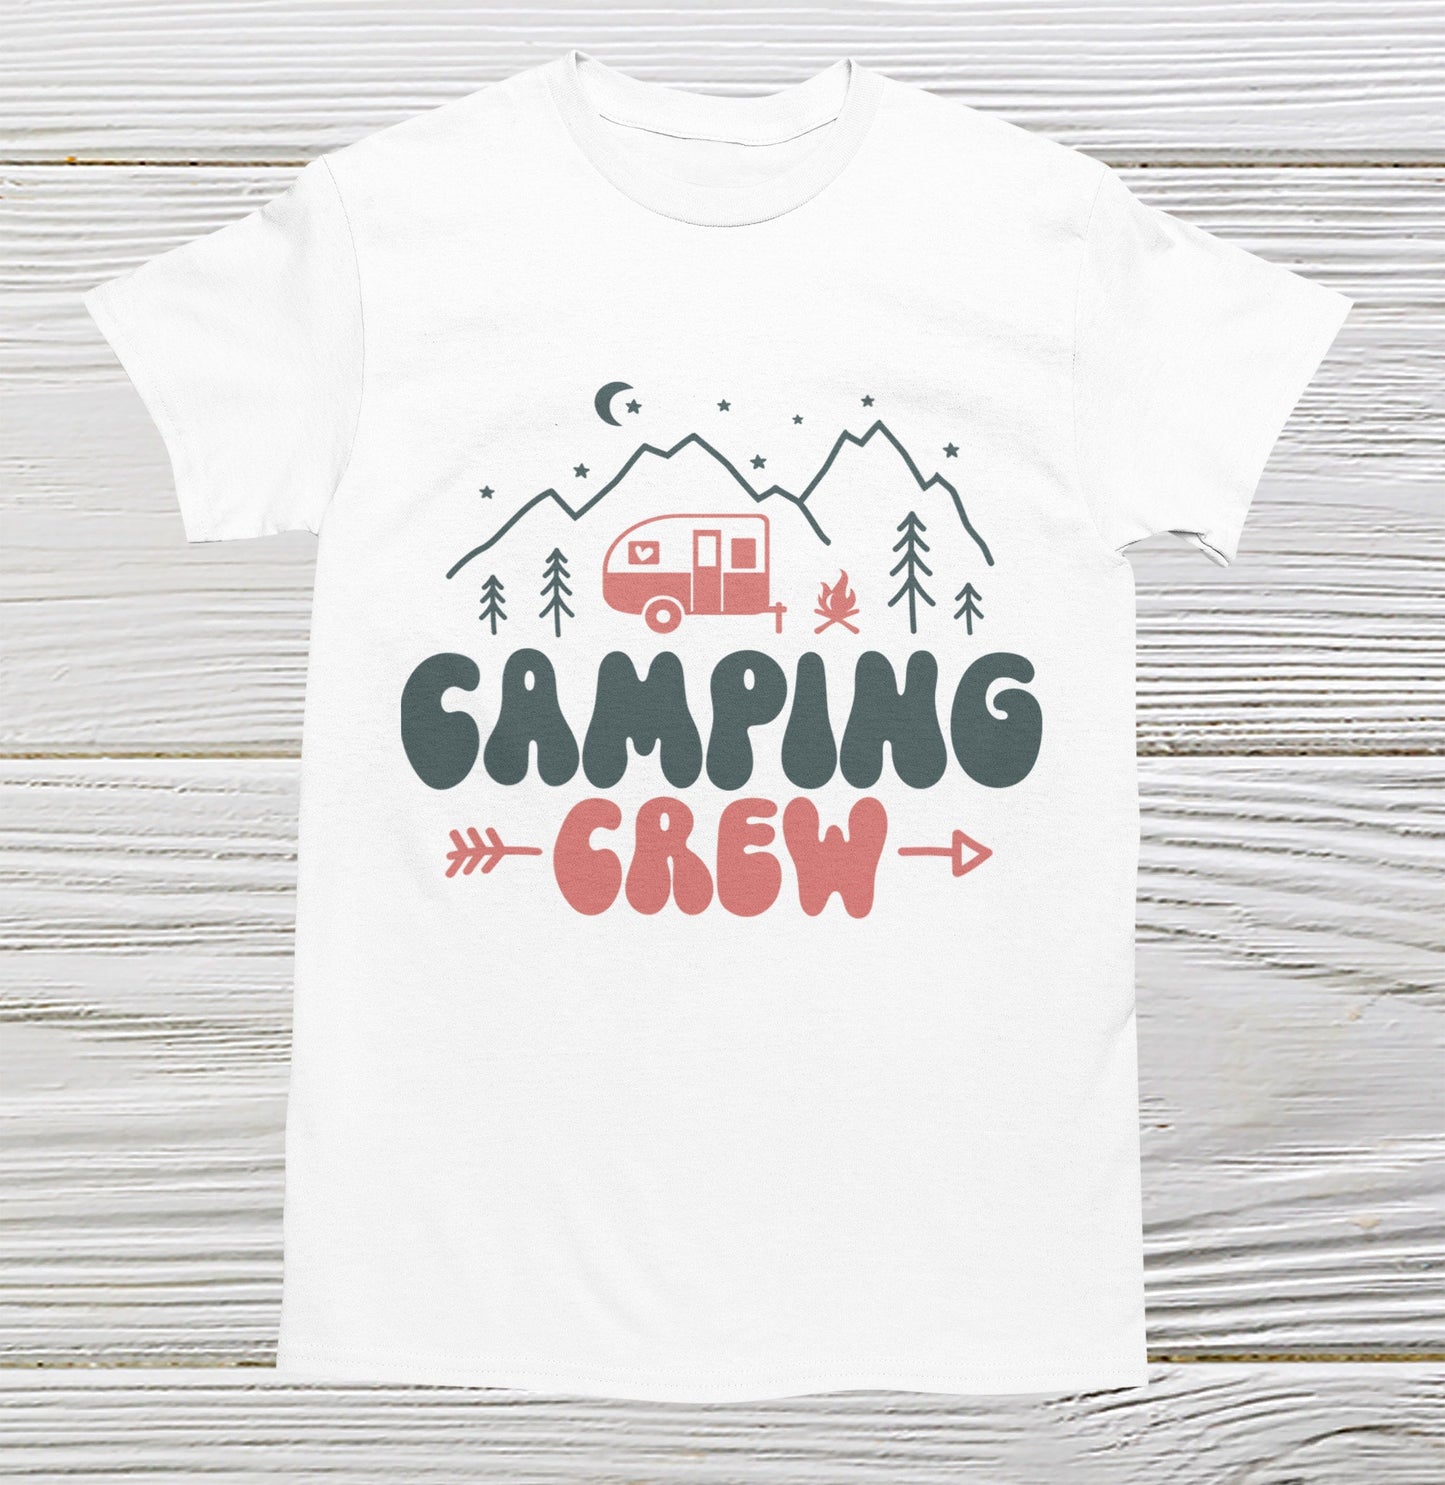 Camping Crew shirts in white color